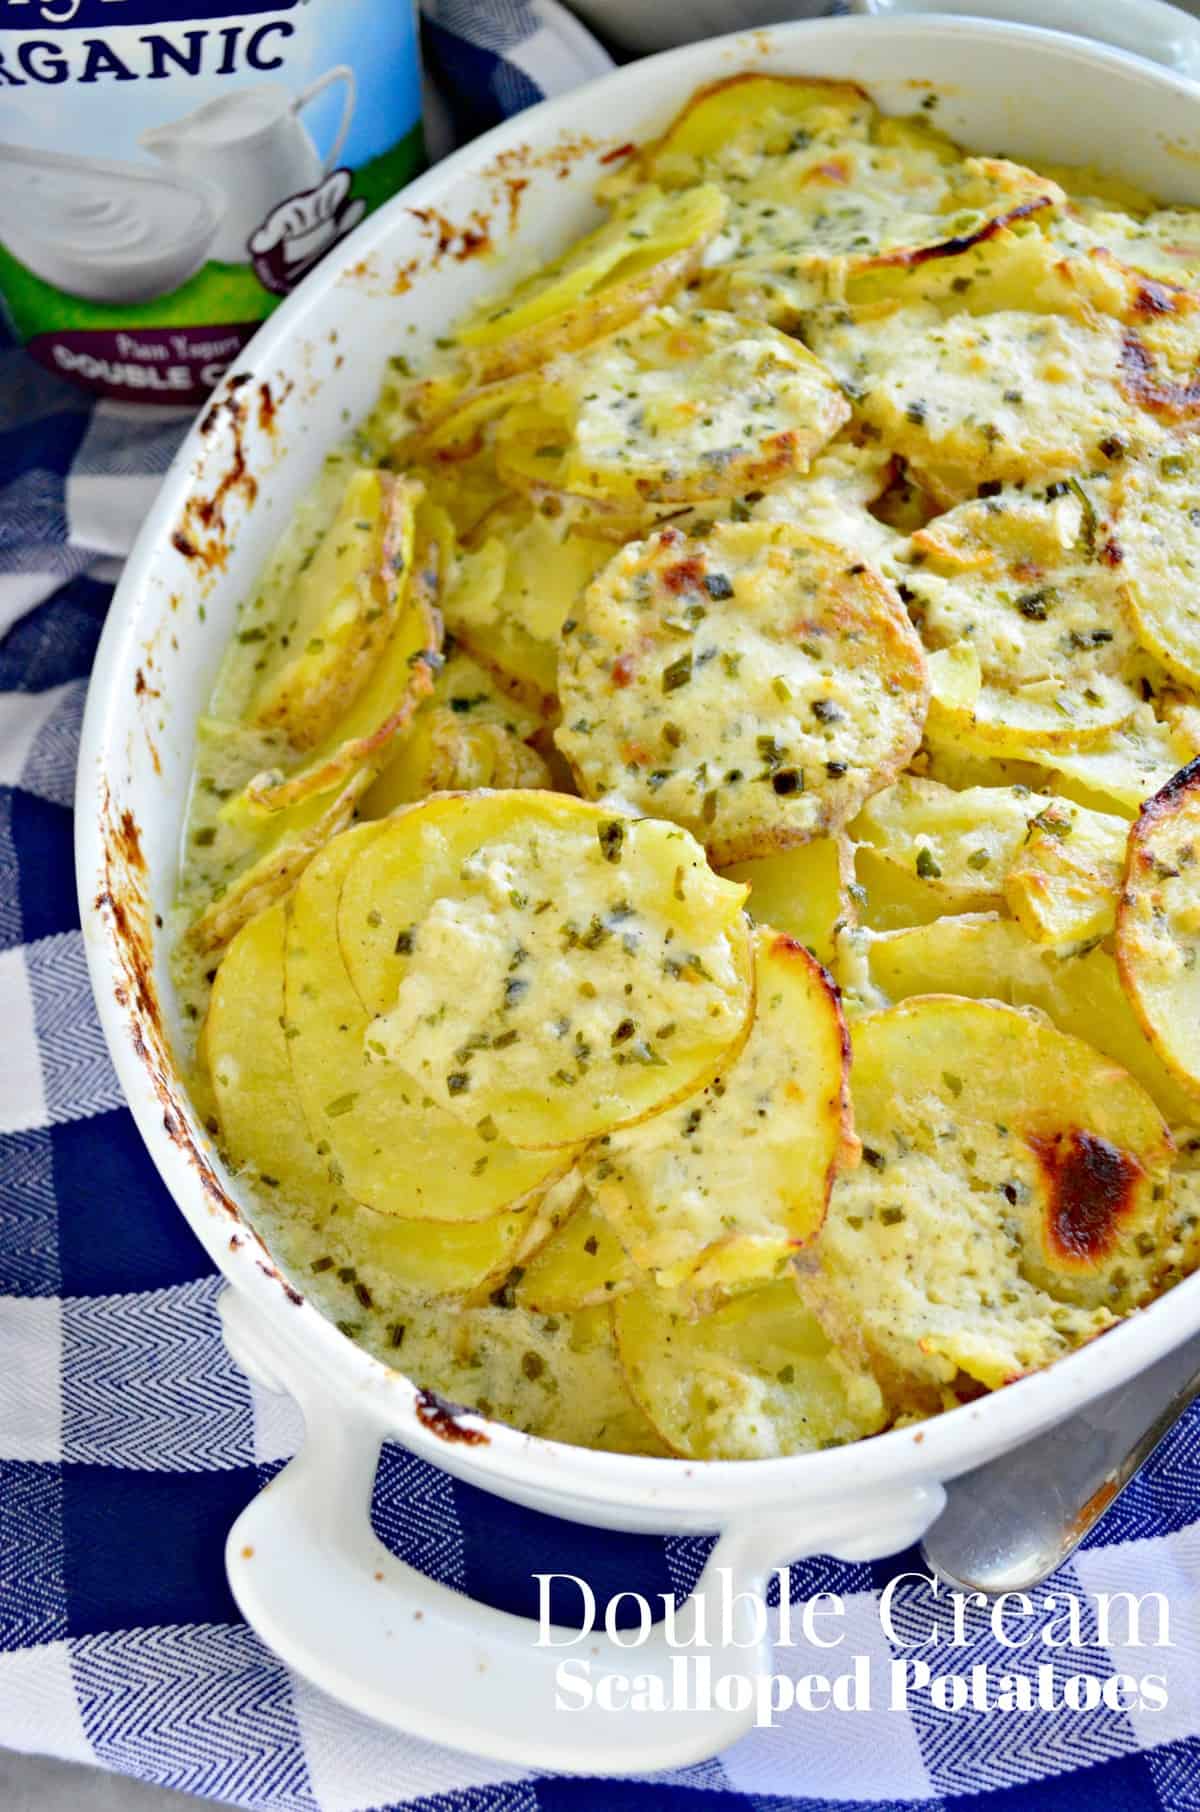 creamy and golden brown scalloped potatoes with herbs and cheese in white ceramic dish with title.